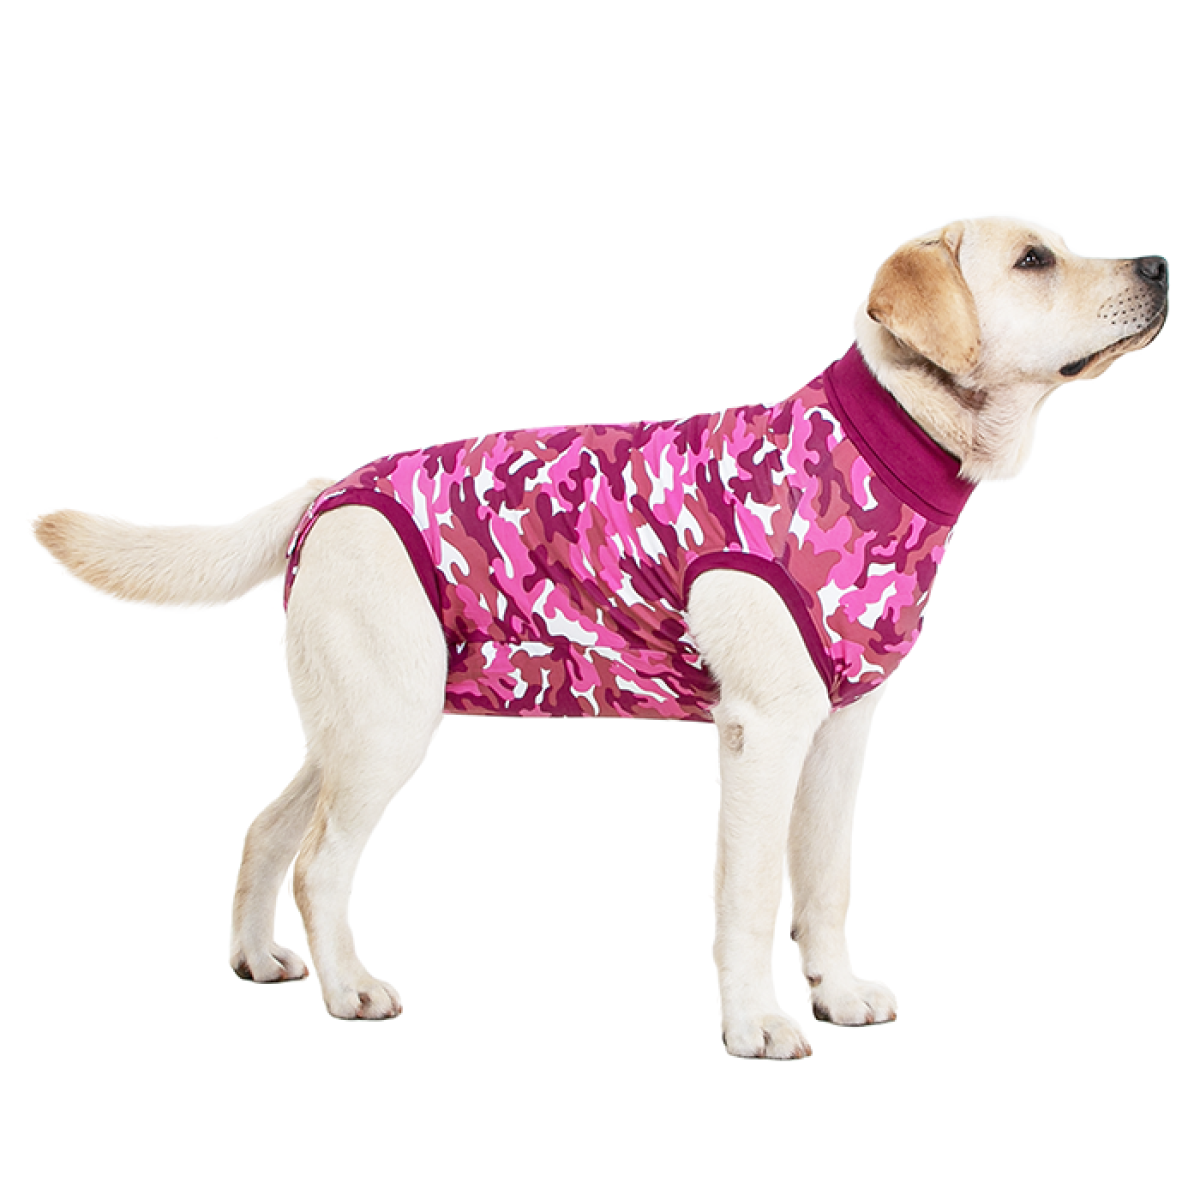 Pet Recovery Suit High Elasticity Comfortable Convenient Soft Allergy Free Prevent  Licking Accelerate Wound Heal Dog Anti-licking Surgery Jumpsuit Pet  Clothing for Puppy 